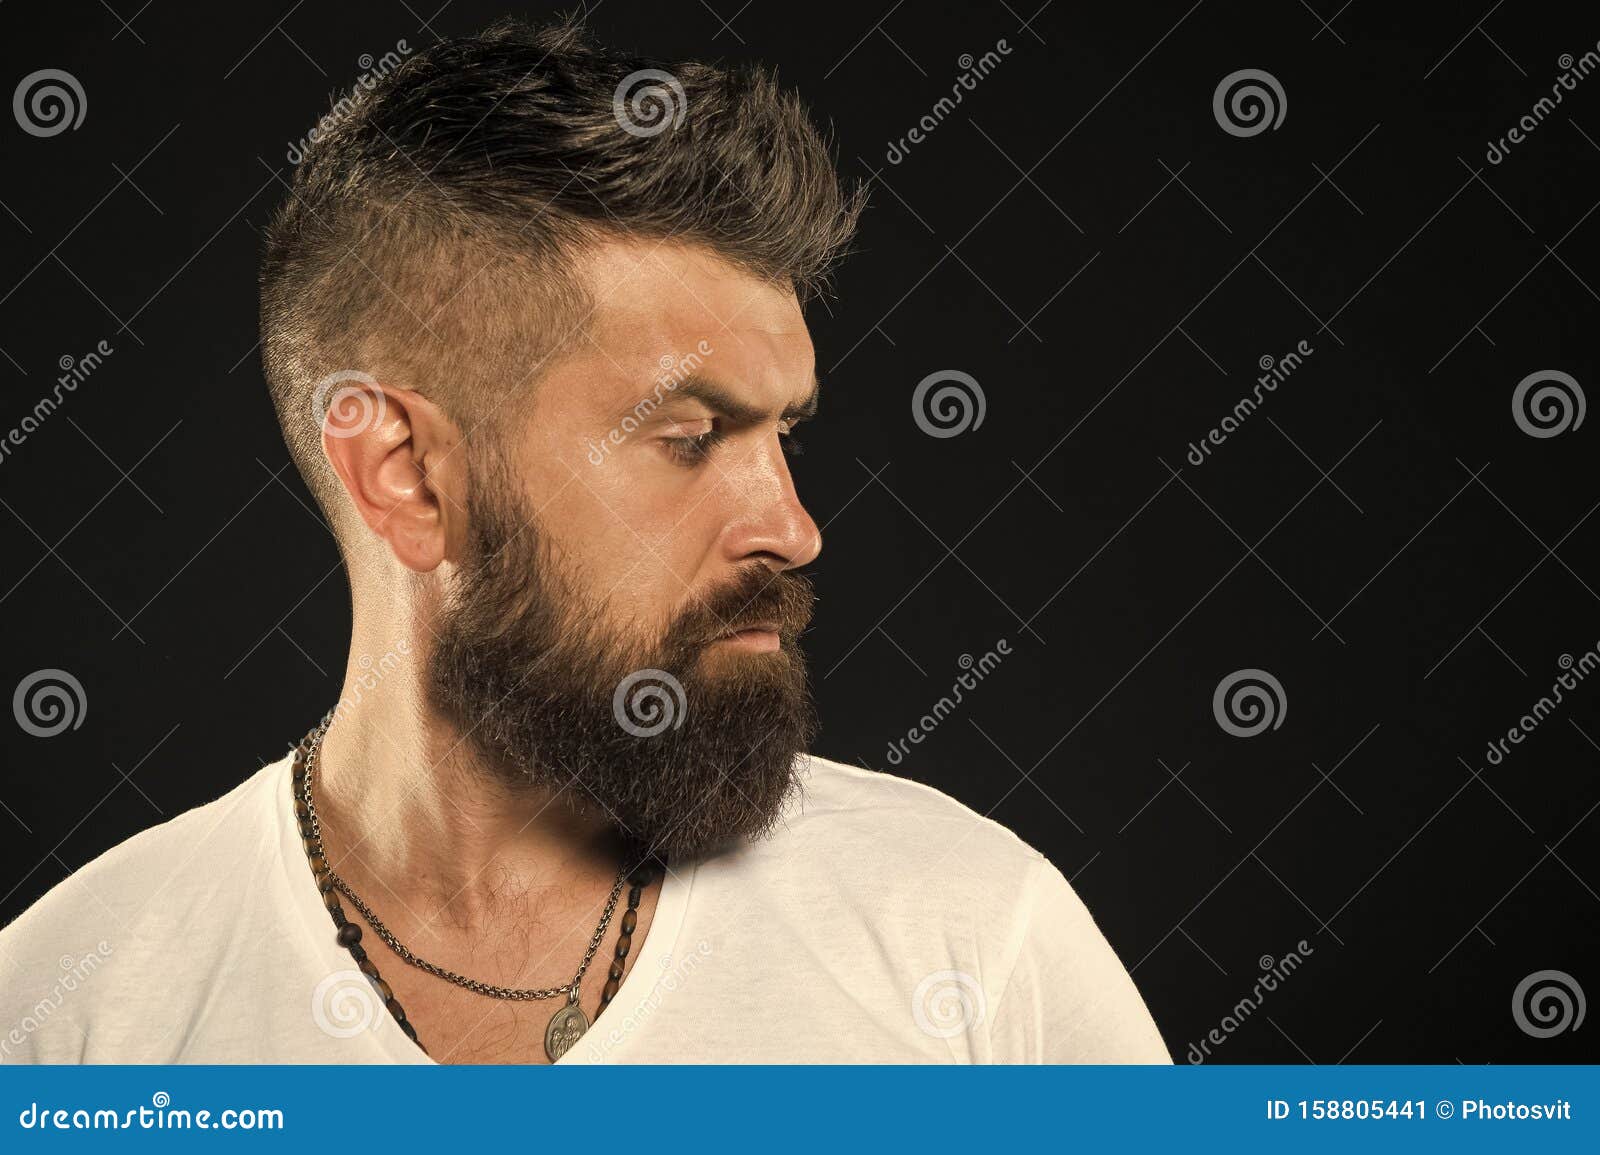 His Beard is Styled Appropriately. Brutal Hipster with Textured Beard Hair  on Black Background Stock Image - Image of shape, bushy: 158805441